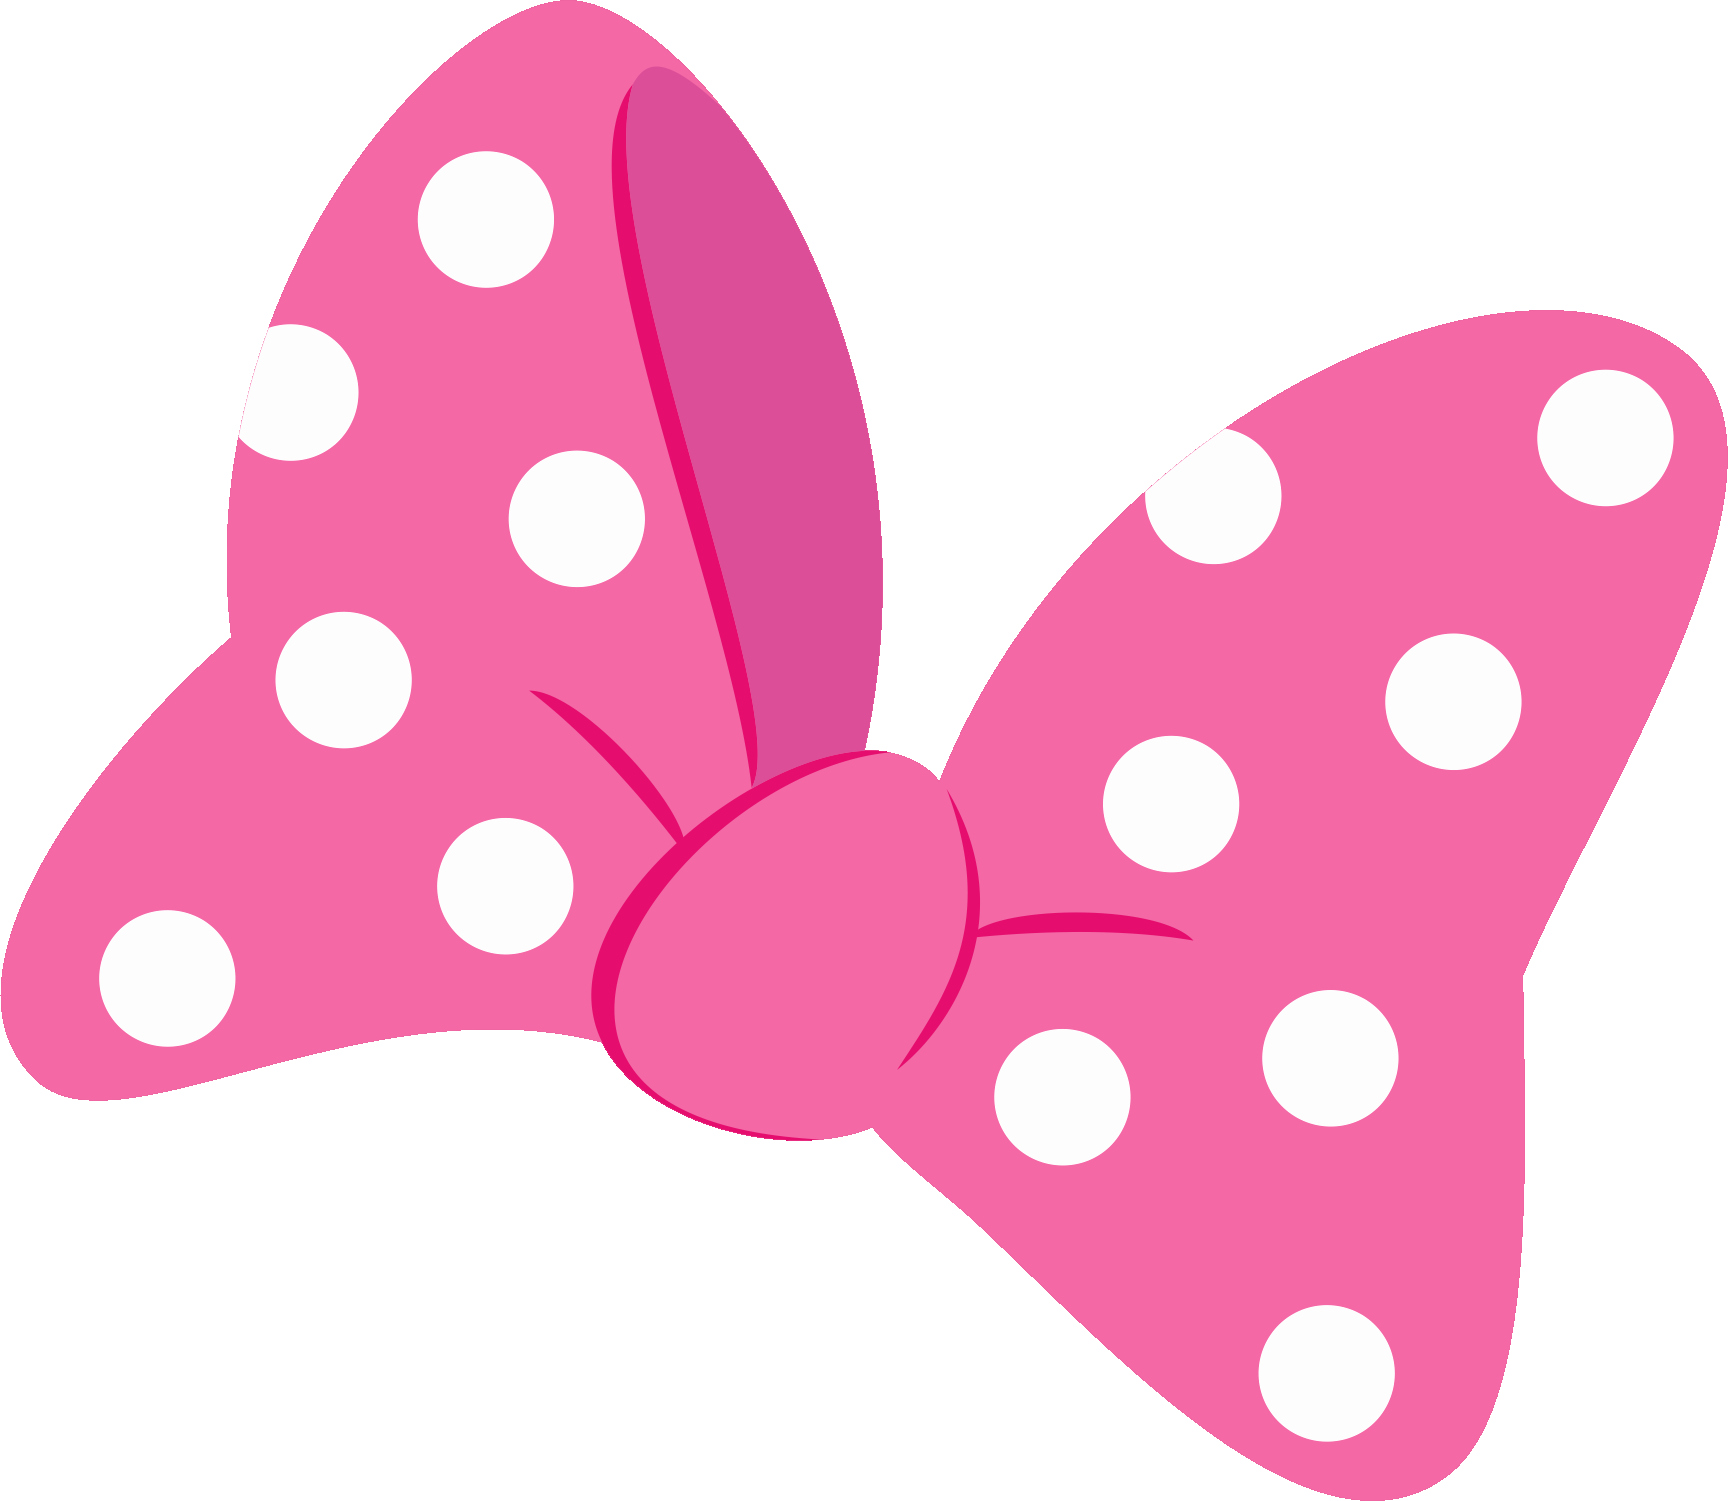 Big Minnie Mouse Bow Elegant Pink Bow Clip Art Google Search